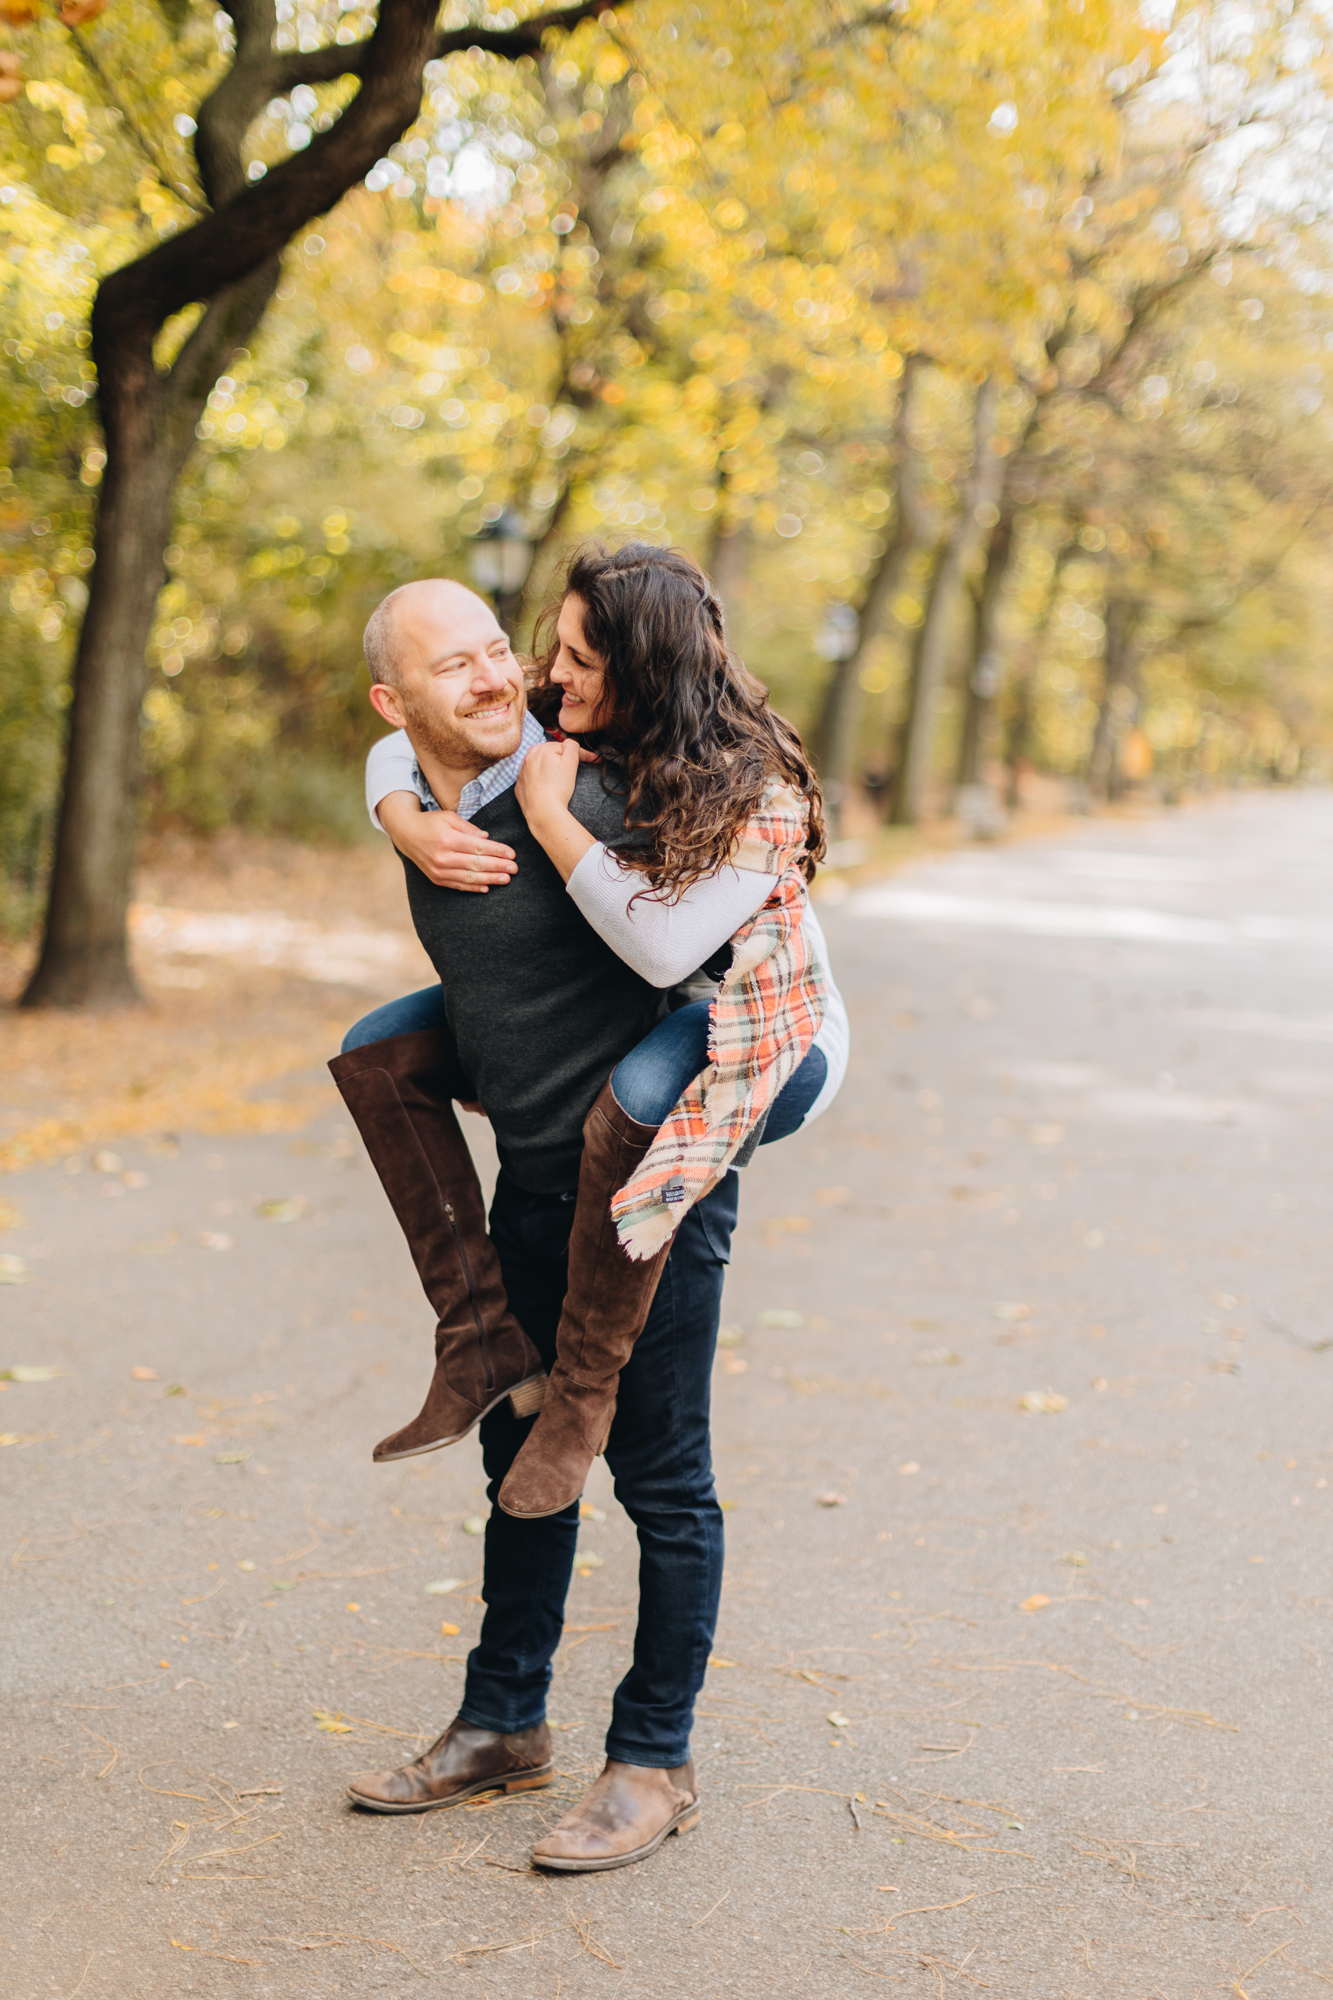 Timeless New York engagement photography